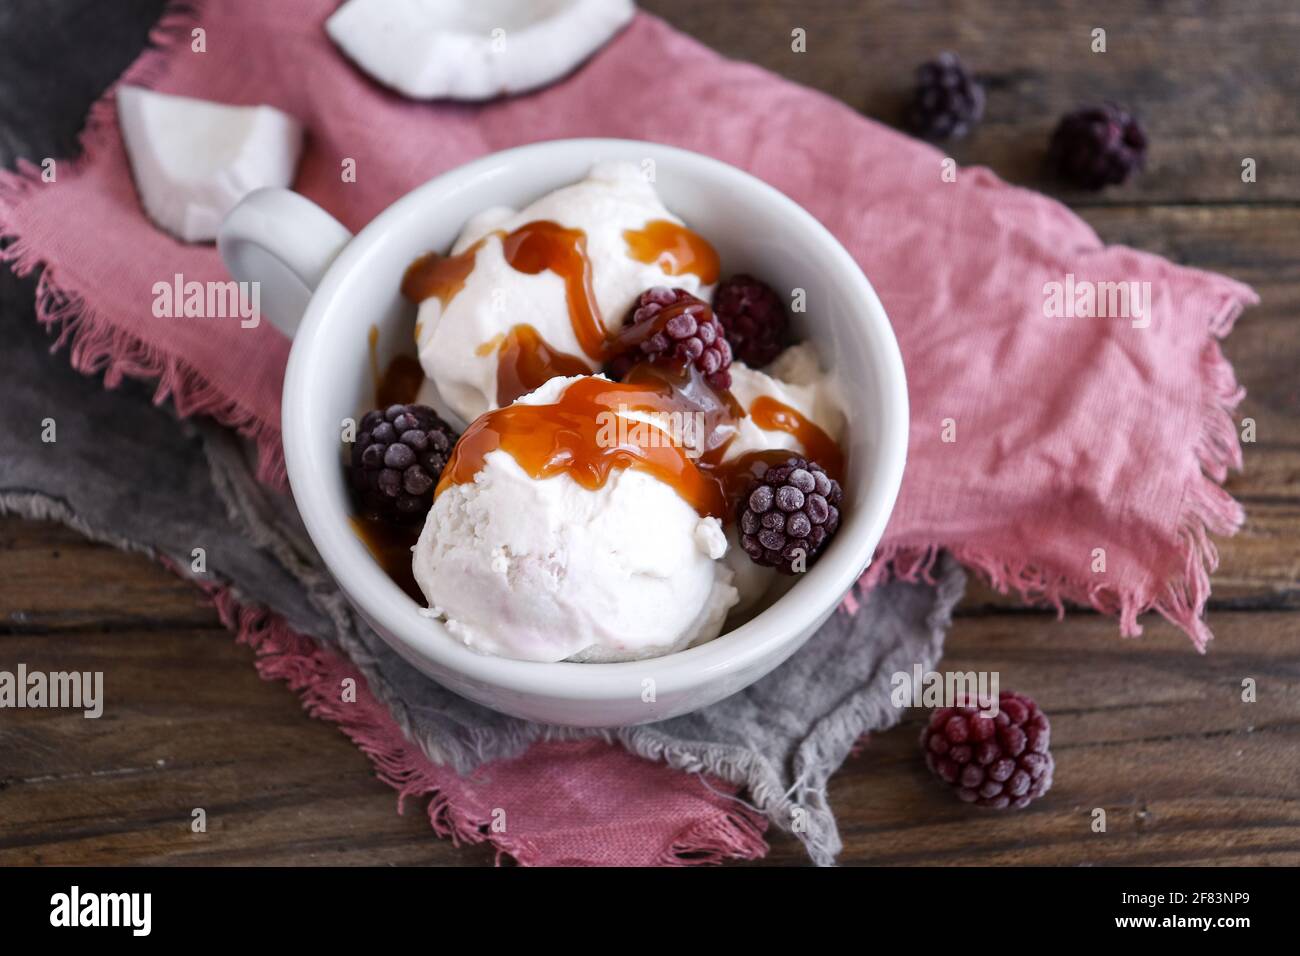 Coconut vegan ice cream in a white cup. Sundae balls and caramel. Ice cream with berries and raspberries. Wooden background, copy space. Stock Photo